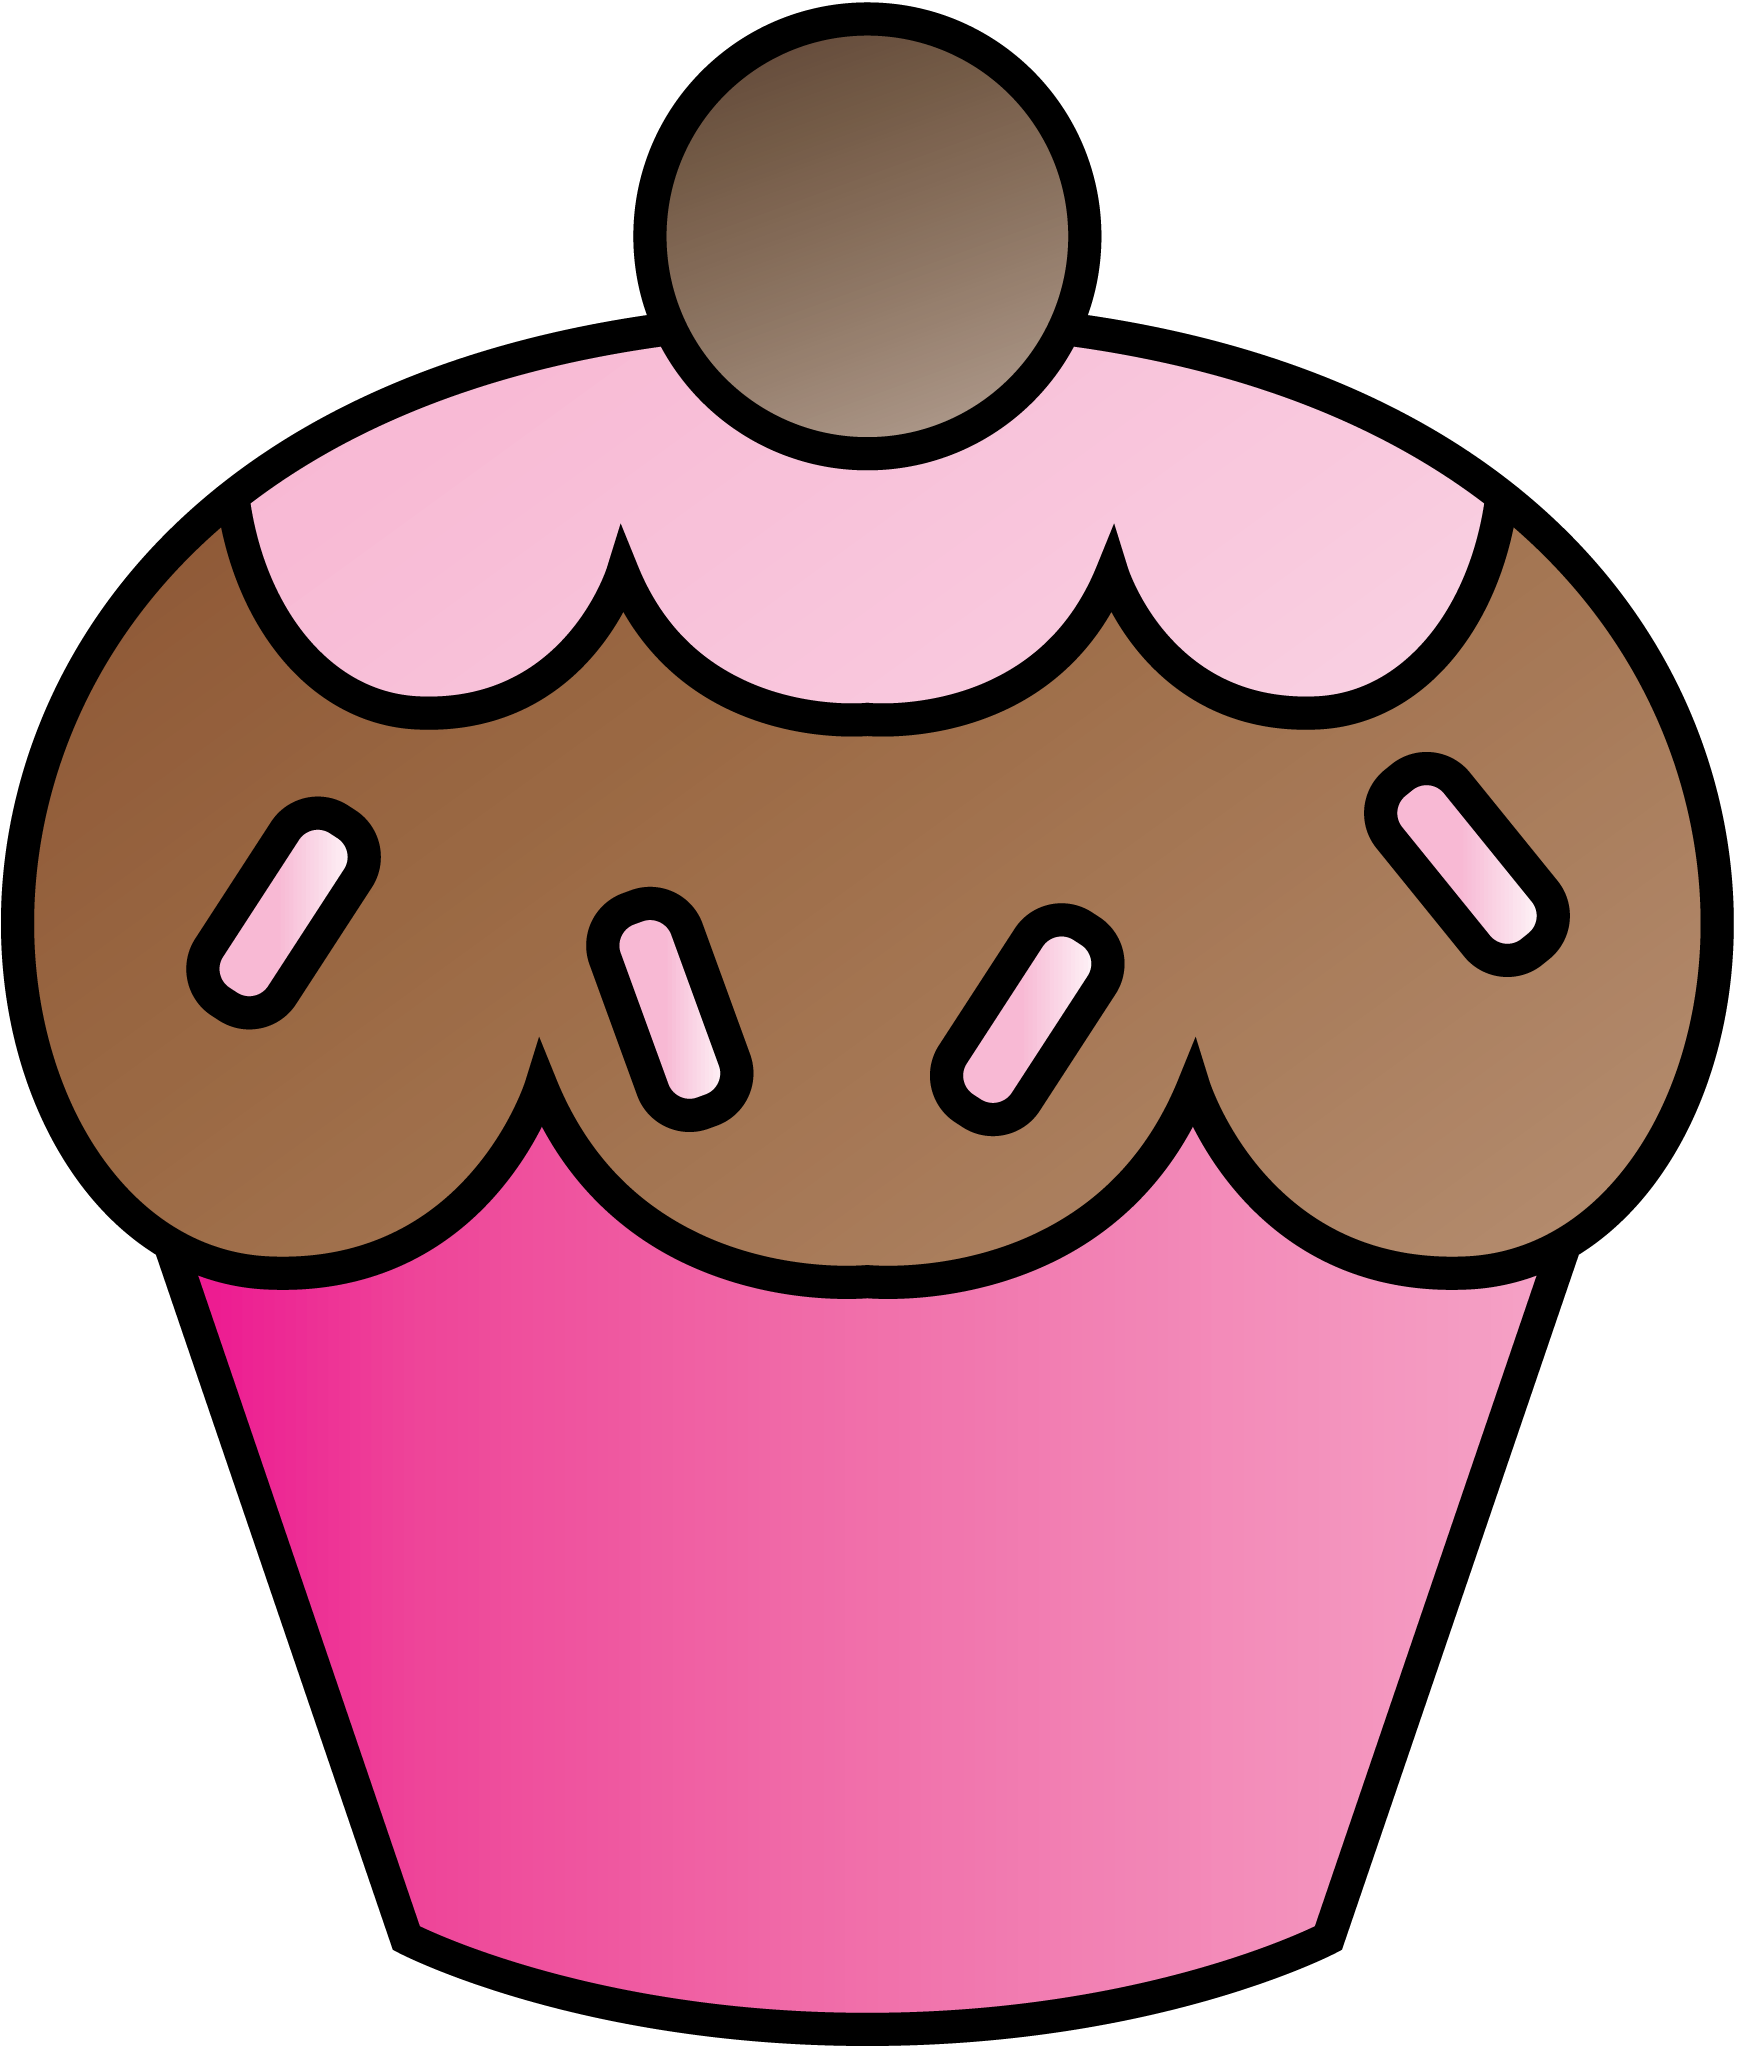 Cupcake art on clip art cupcake and pink cupcakes 2 clipartcow